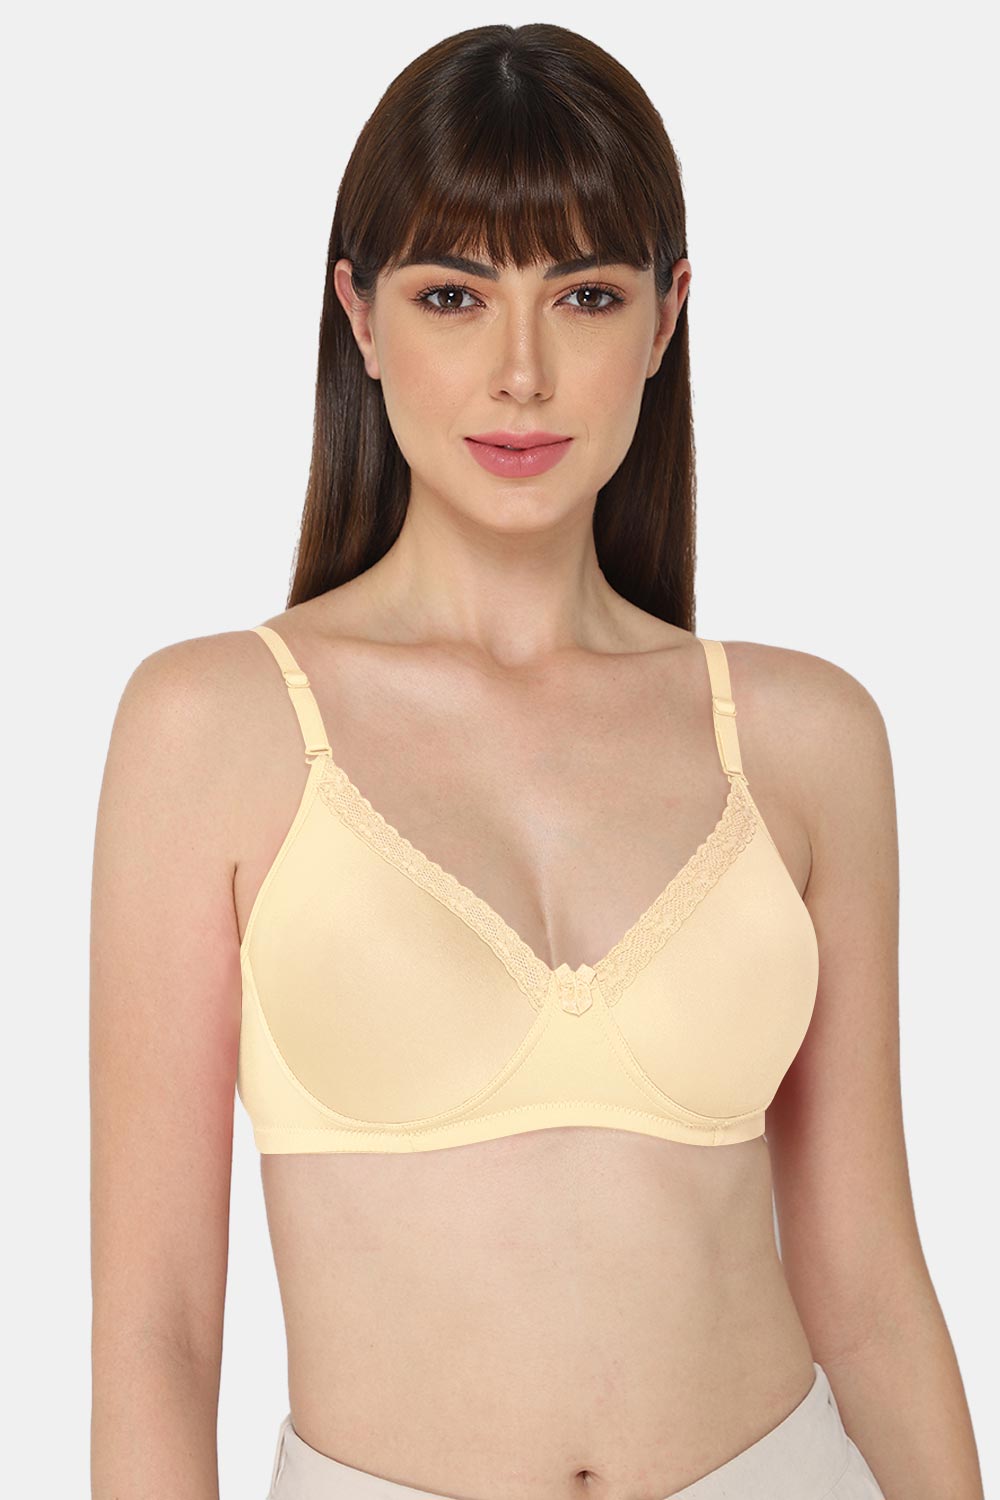 Get ready to feel extra comfortable with the elasticated crisscross design  of our Pretti bra - the perfect addition to your lingerie collection!  #pretti #naiduhallbra #naiduhallbras #lingerie #bra #vnhnaiduhall  #naiduhallfamilystore #vnh #bras #